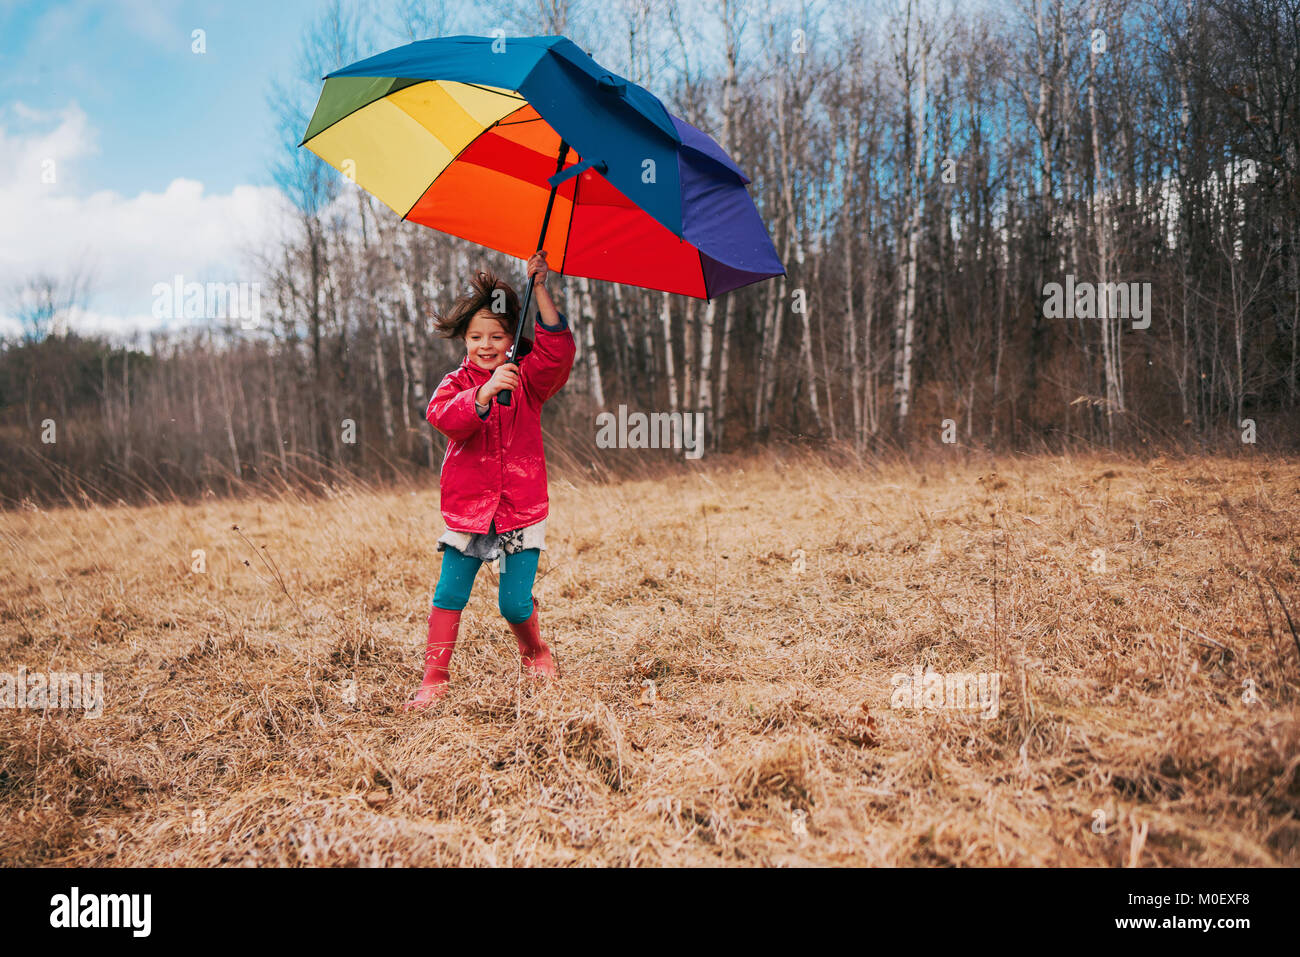 Girl holding an open umbrella on a windy day Stock Photo